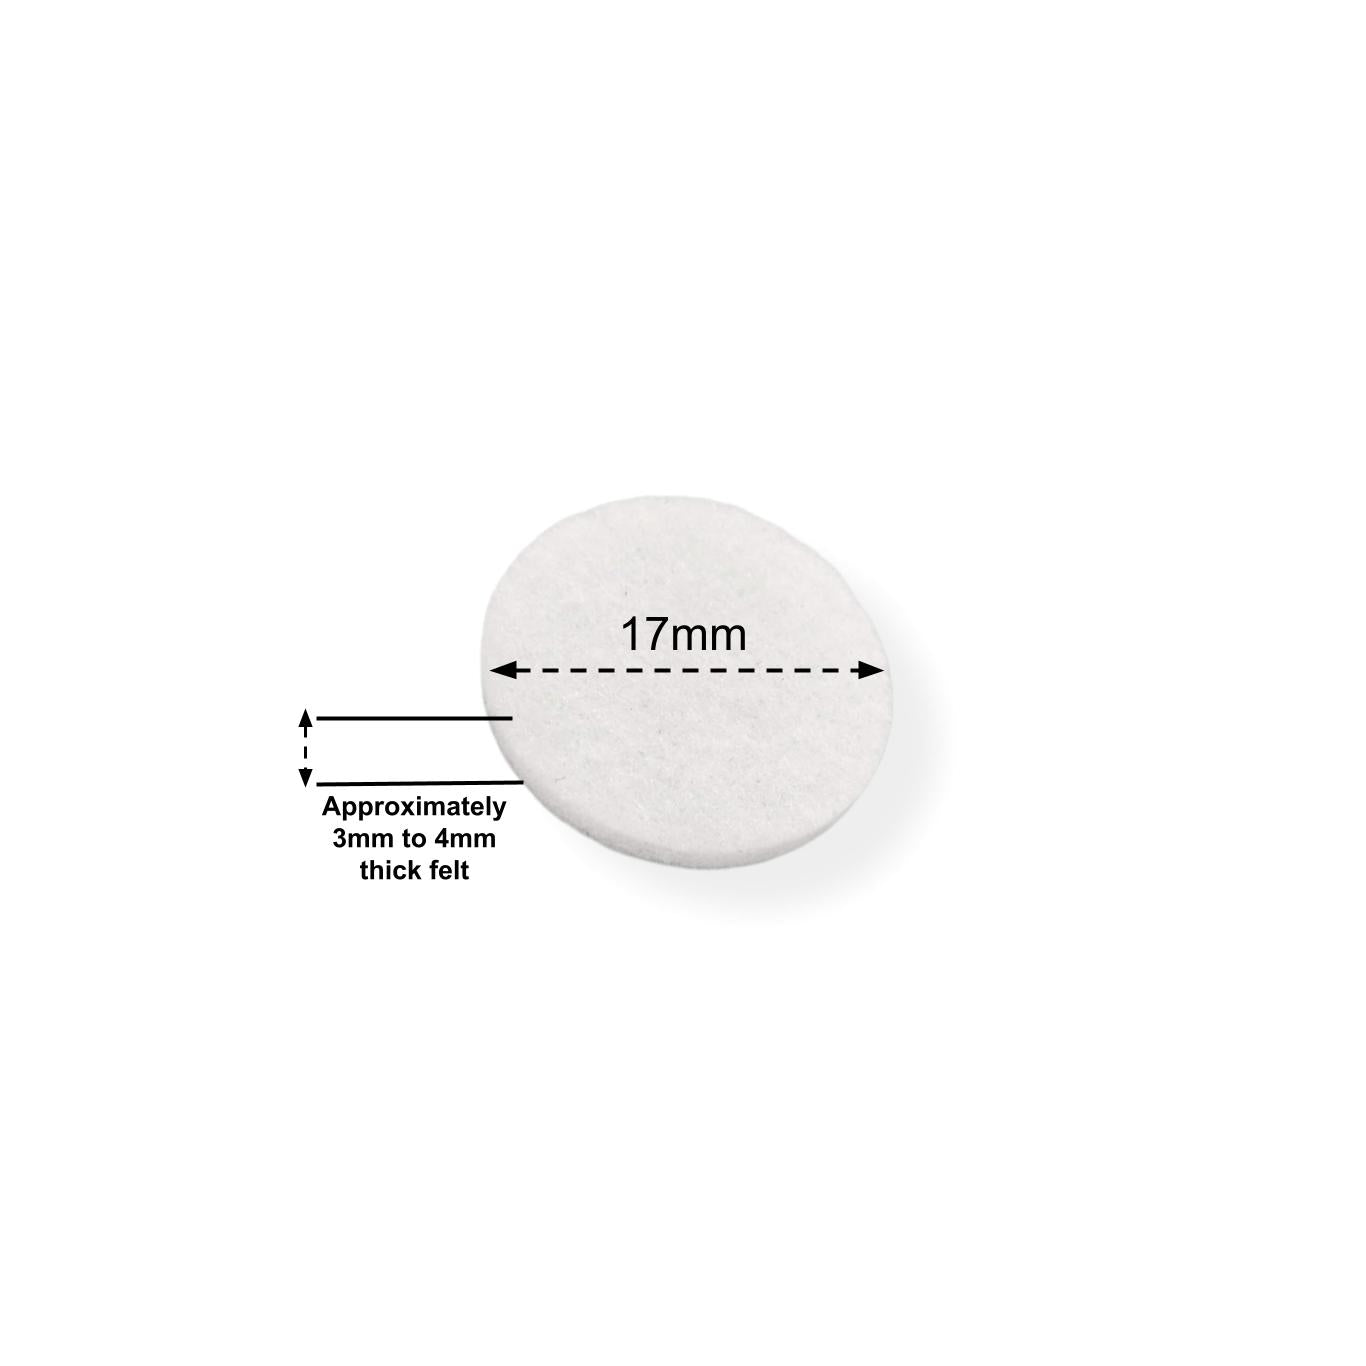 Felt Pads - White Self Adhesive Stick on Felt - Round 17mm Diameter - Made in Germany - Keay Vital Parts